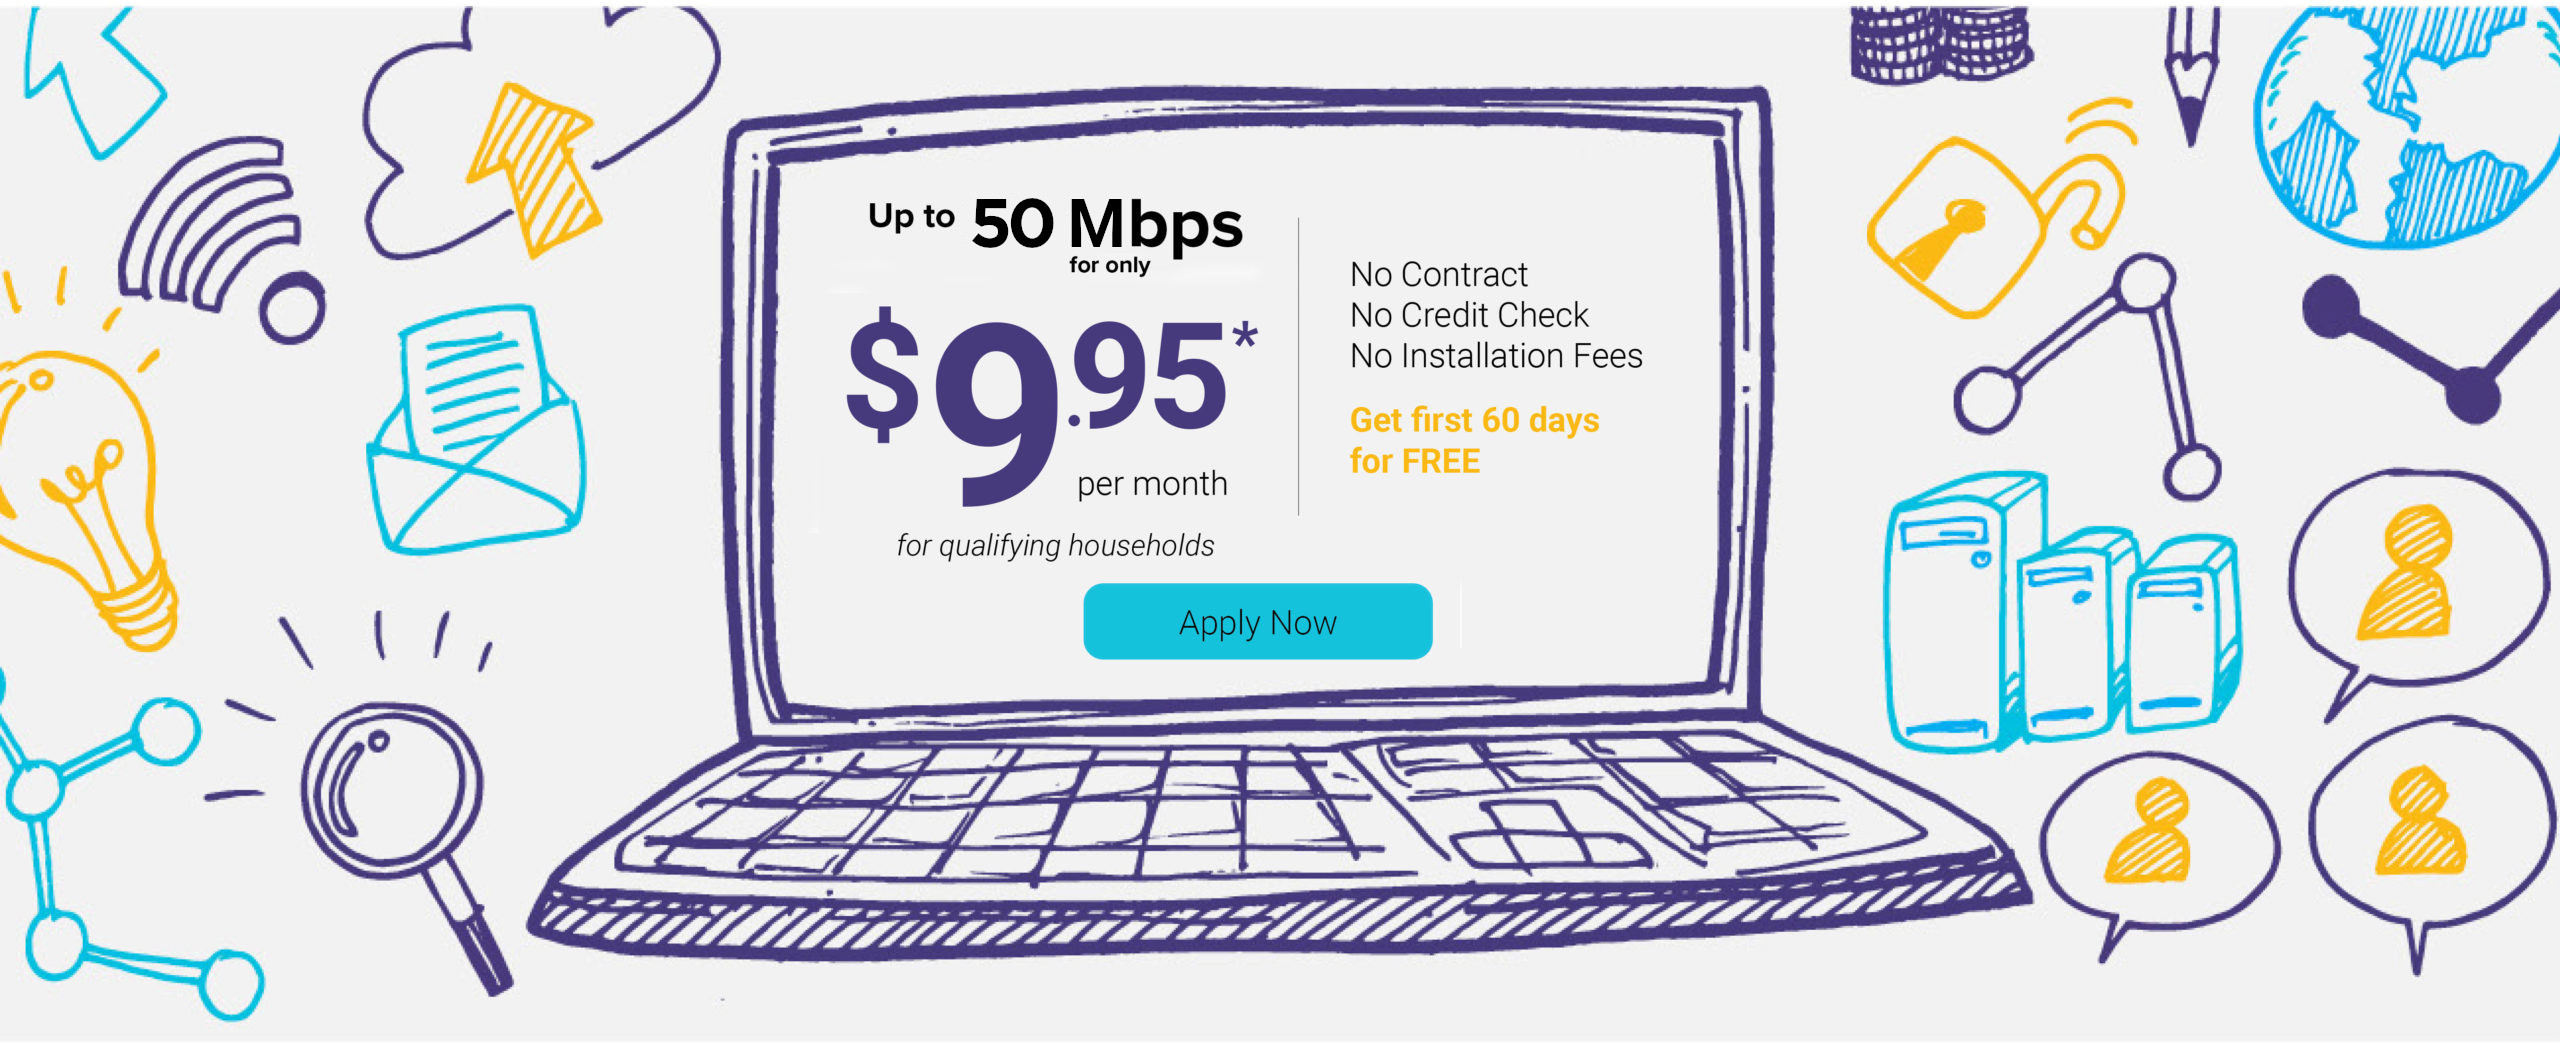 Up to 50 mbps for only $9.95 per month for qualifying households. No Contract. No credit check. No installation fees. Get first 60 days for free. Apply now